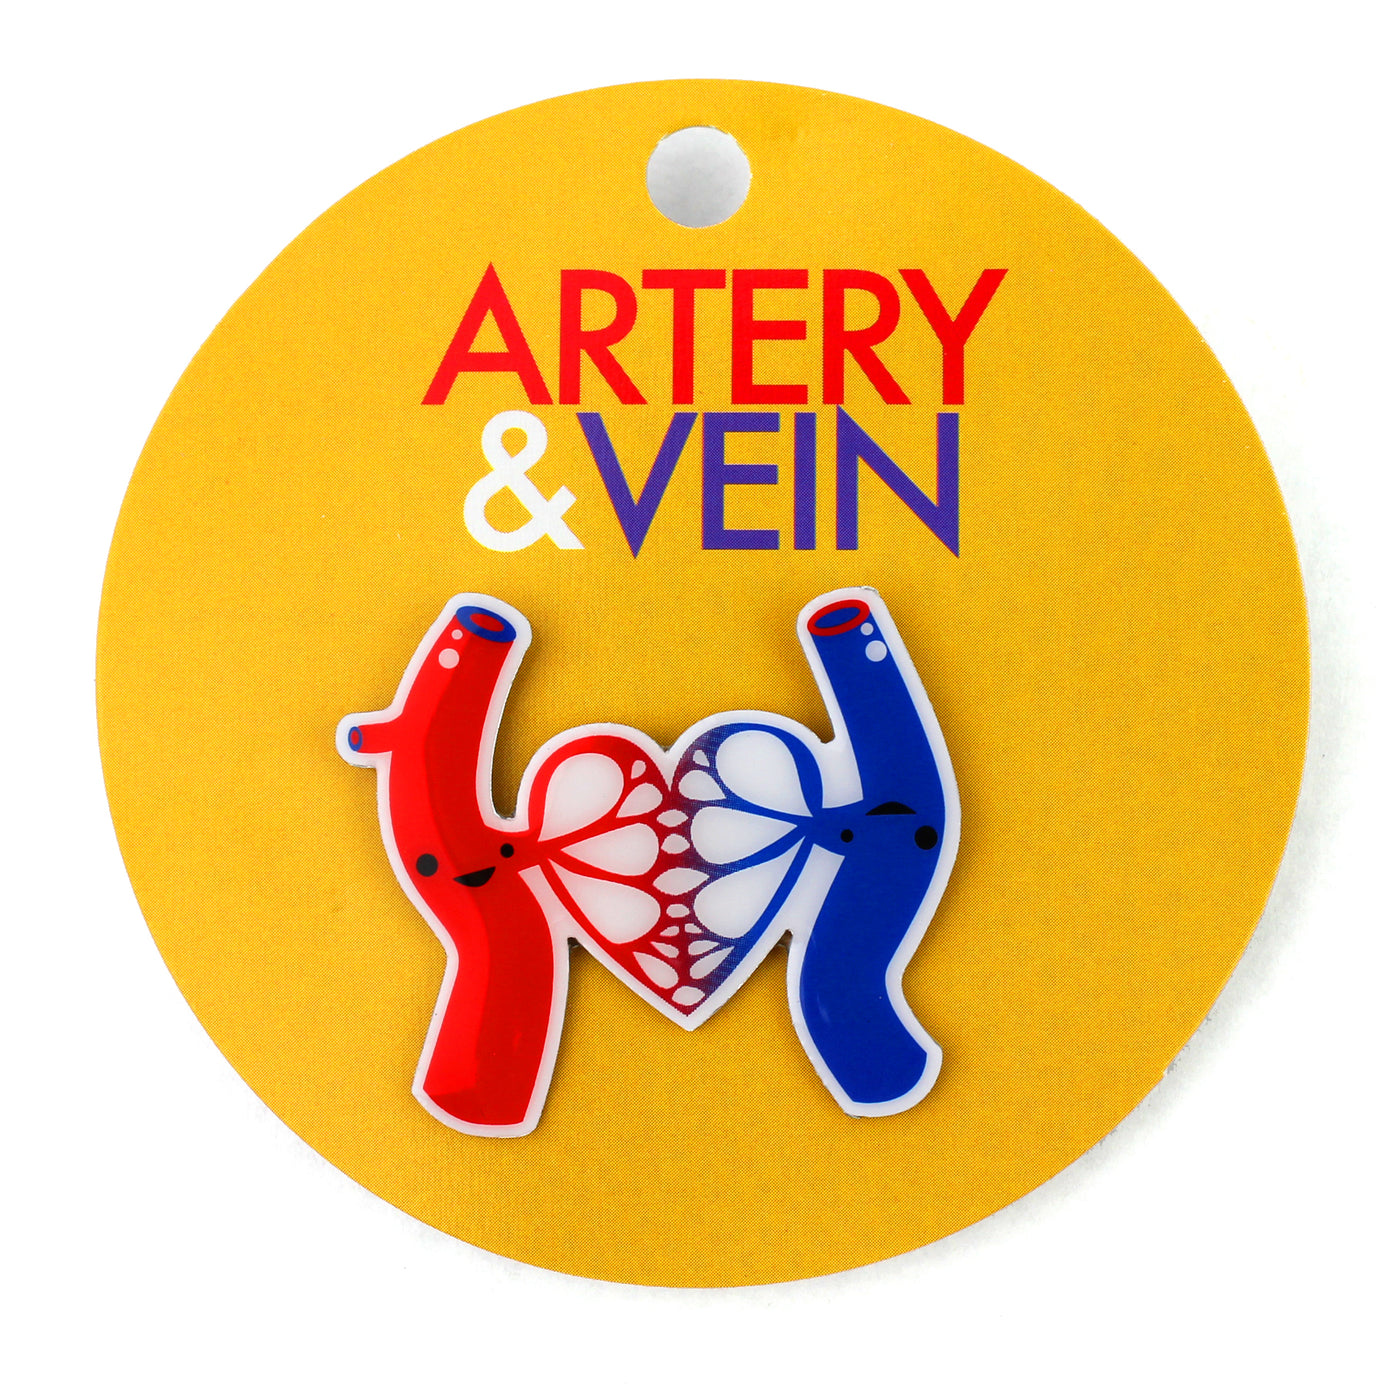 Artery & Vein Lapel Pin | Blood Donor Bank Pins - Funny Cute Hematology Phlebotomy Gifts